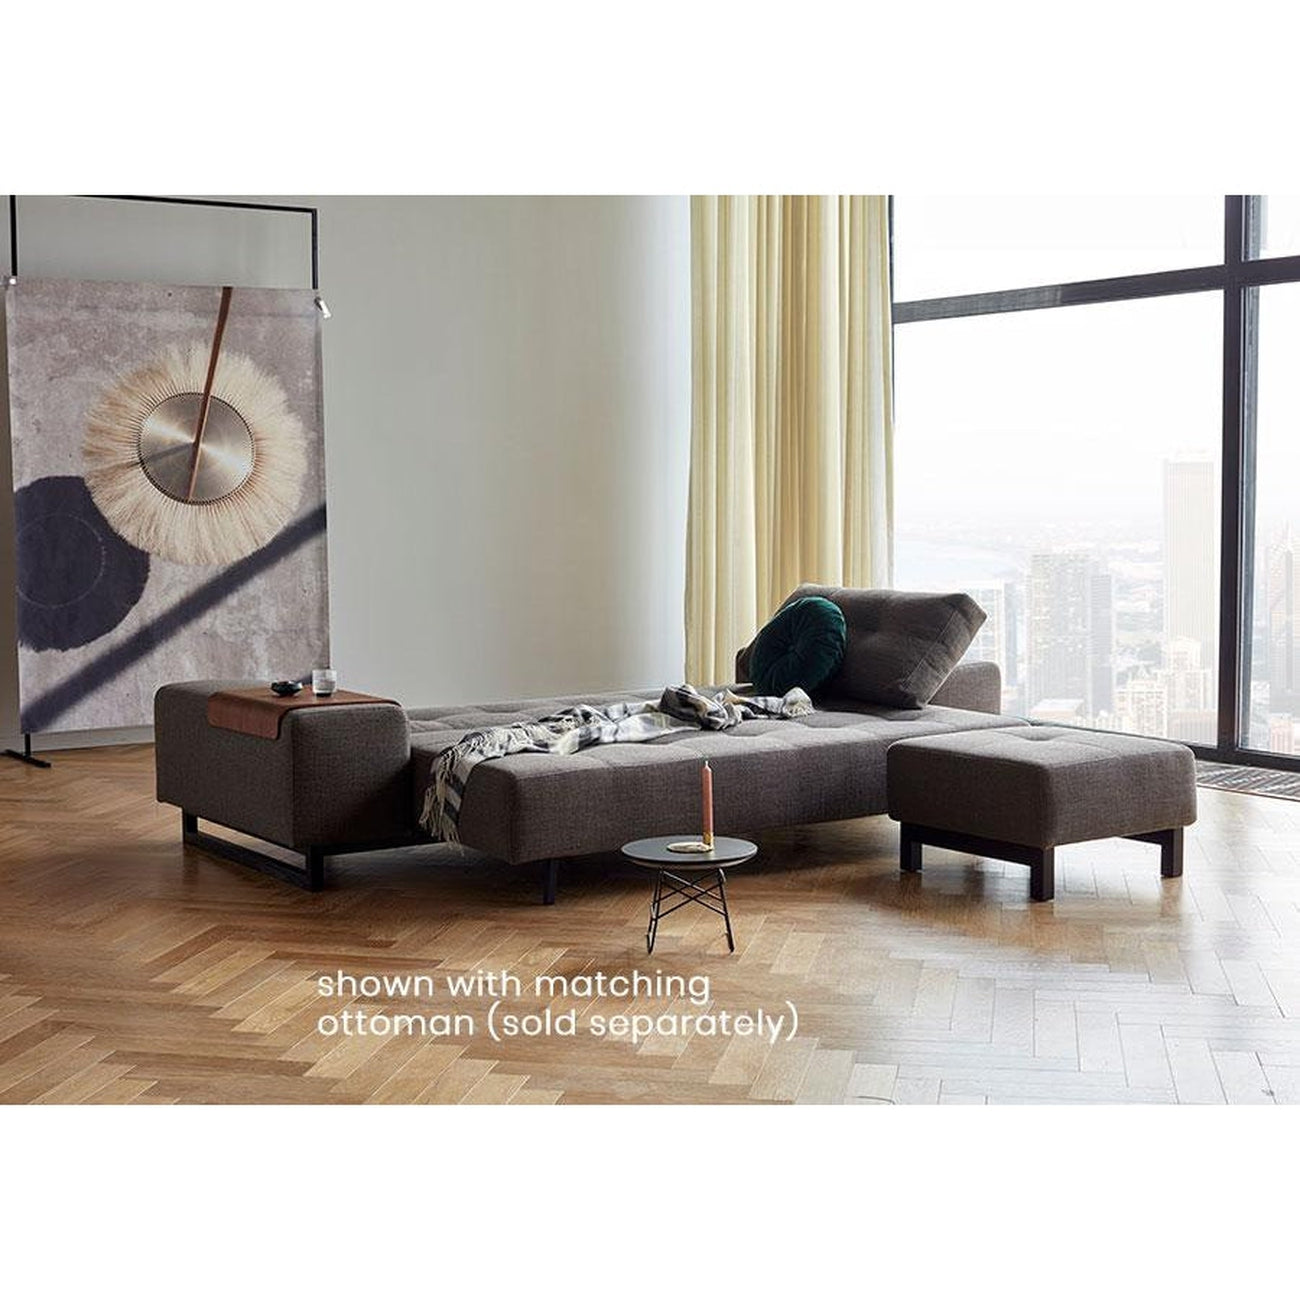 Grand D.E.L sofa BLACK WOOD (QUEEN)-Innovation Living-INNO-94-748190527-3-SofasMixed Dance Natural-7-France and Son